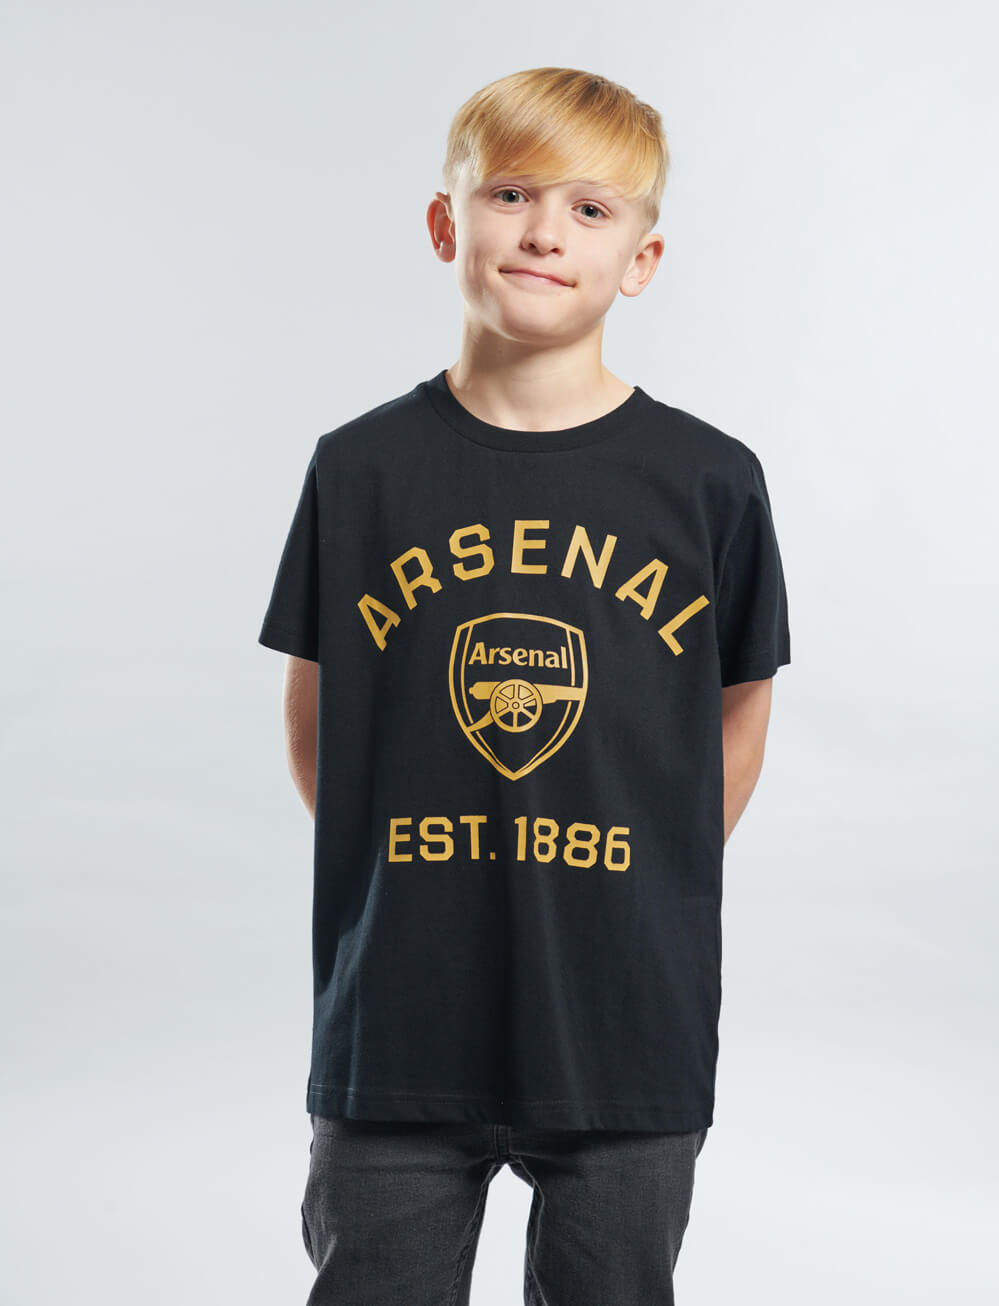 Official Arsenal Kids Graphic T-Shirt - Black - The World Football Store